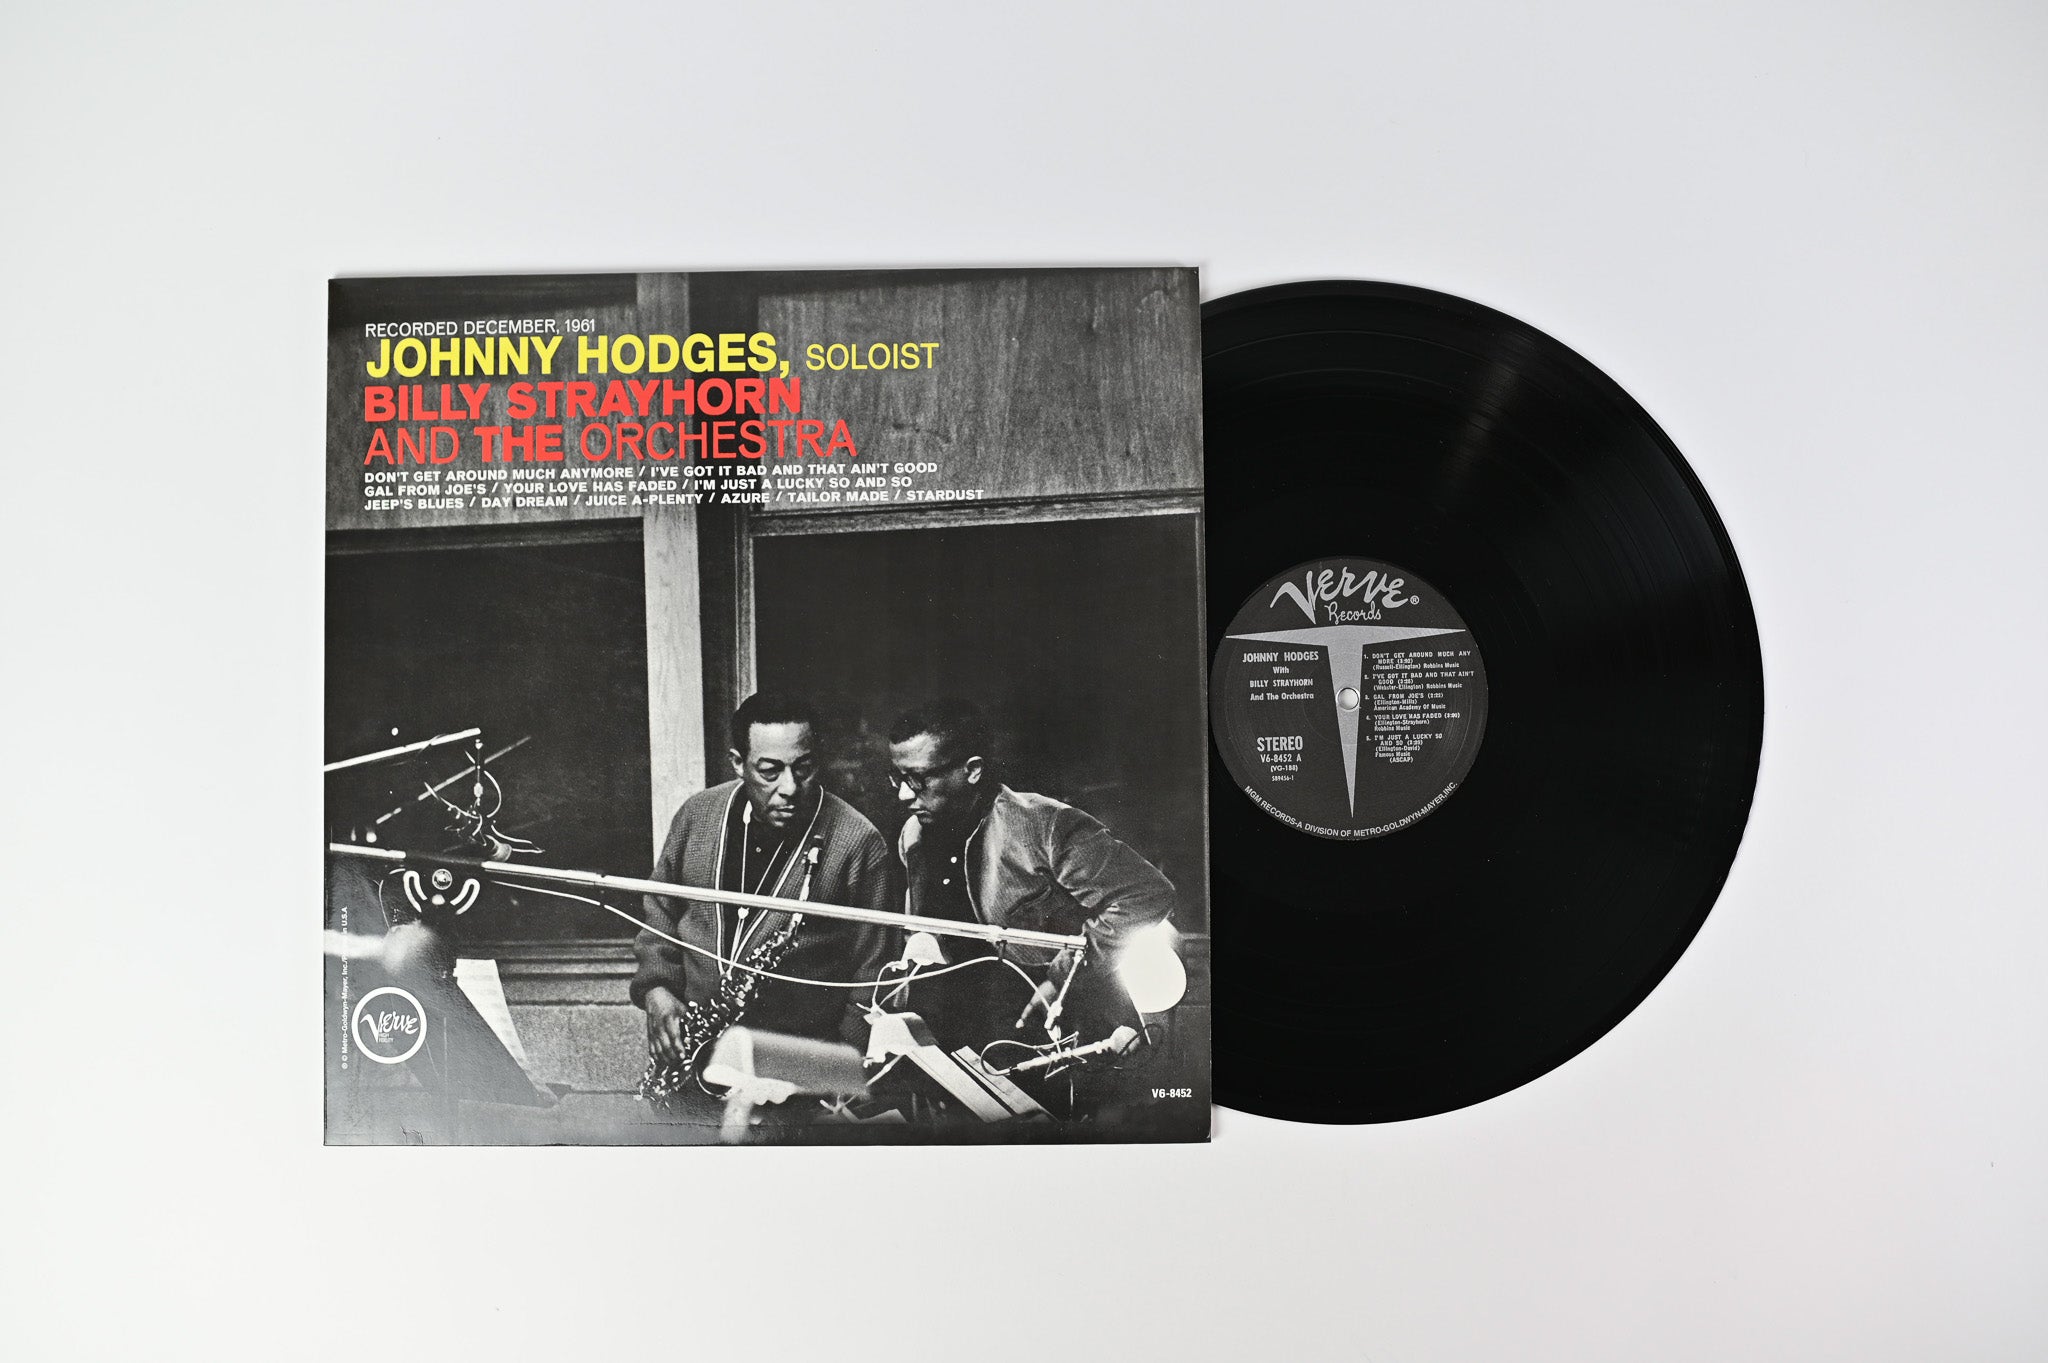 Johnny Hodges - Johnny Hodges With Billy Strayhorn And The Orchestra on Verve Speakers Corner Reissue